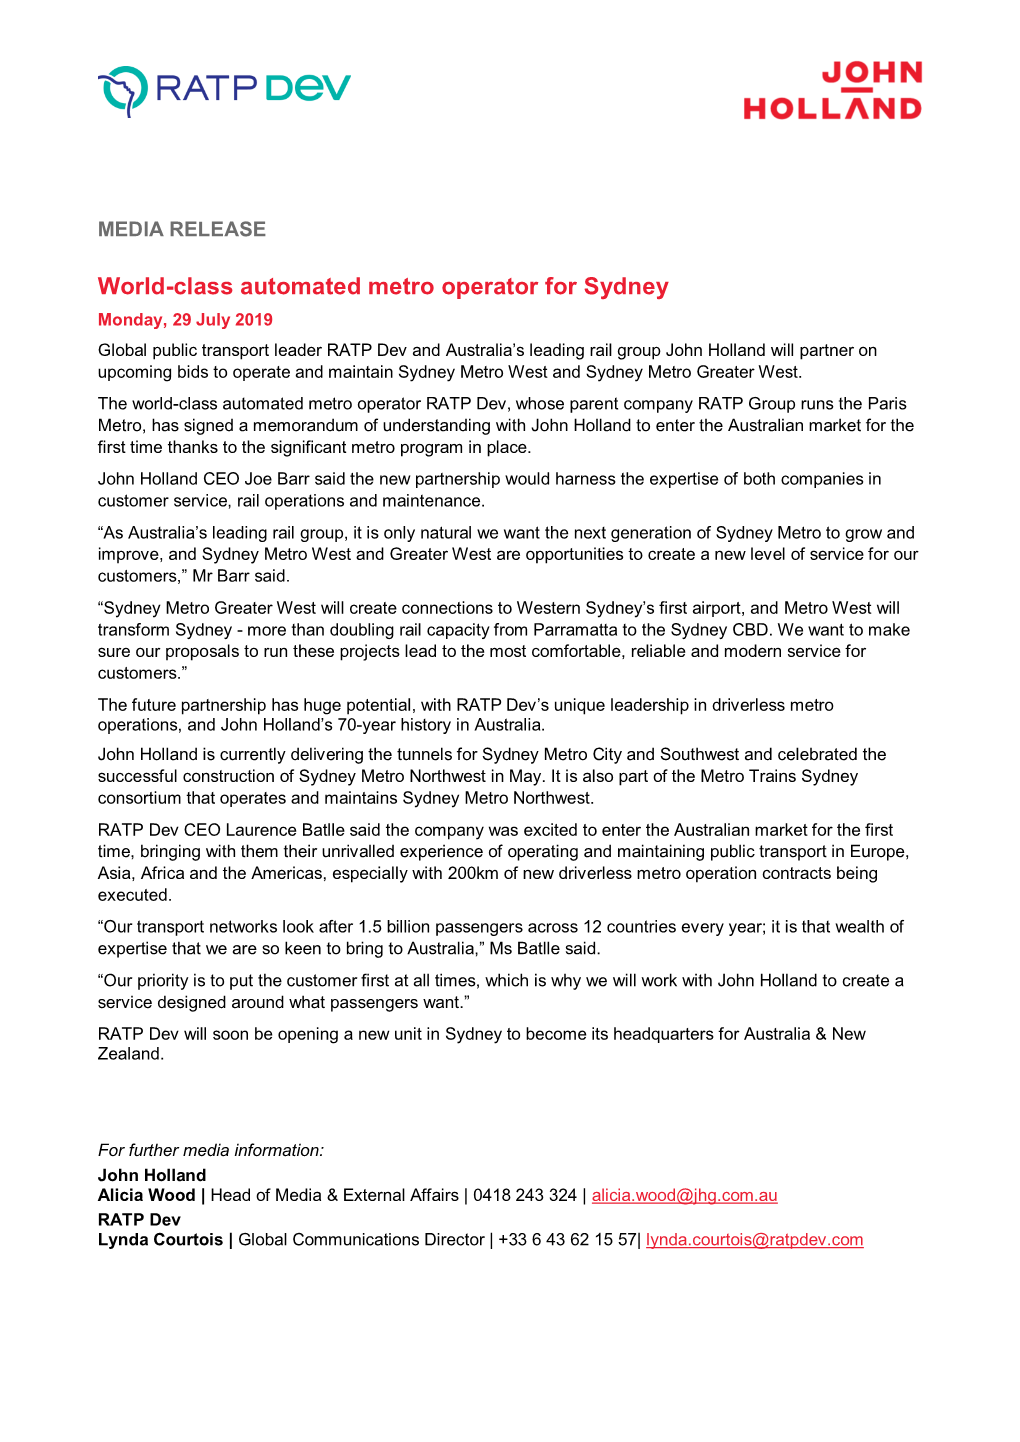 World-Class Automated Metro Operator for Sydney